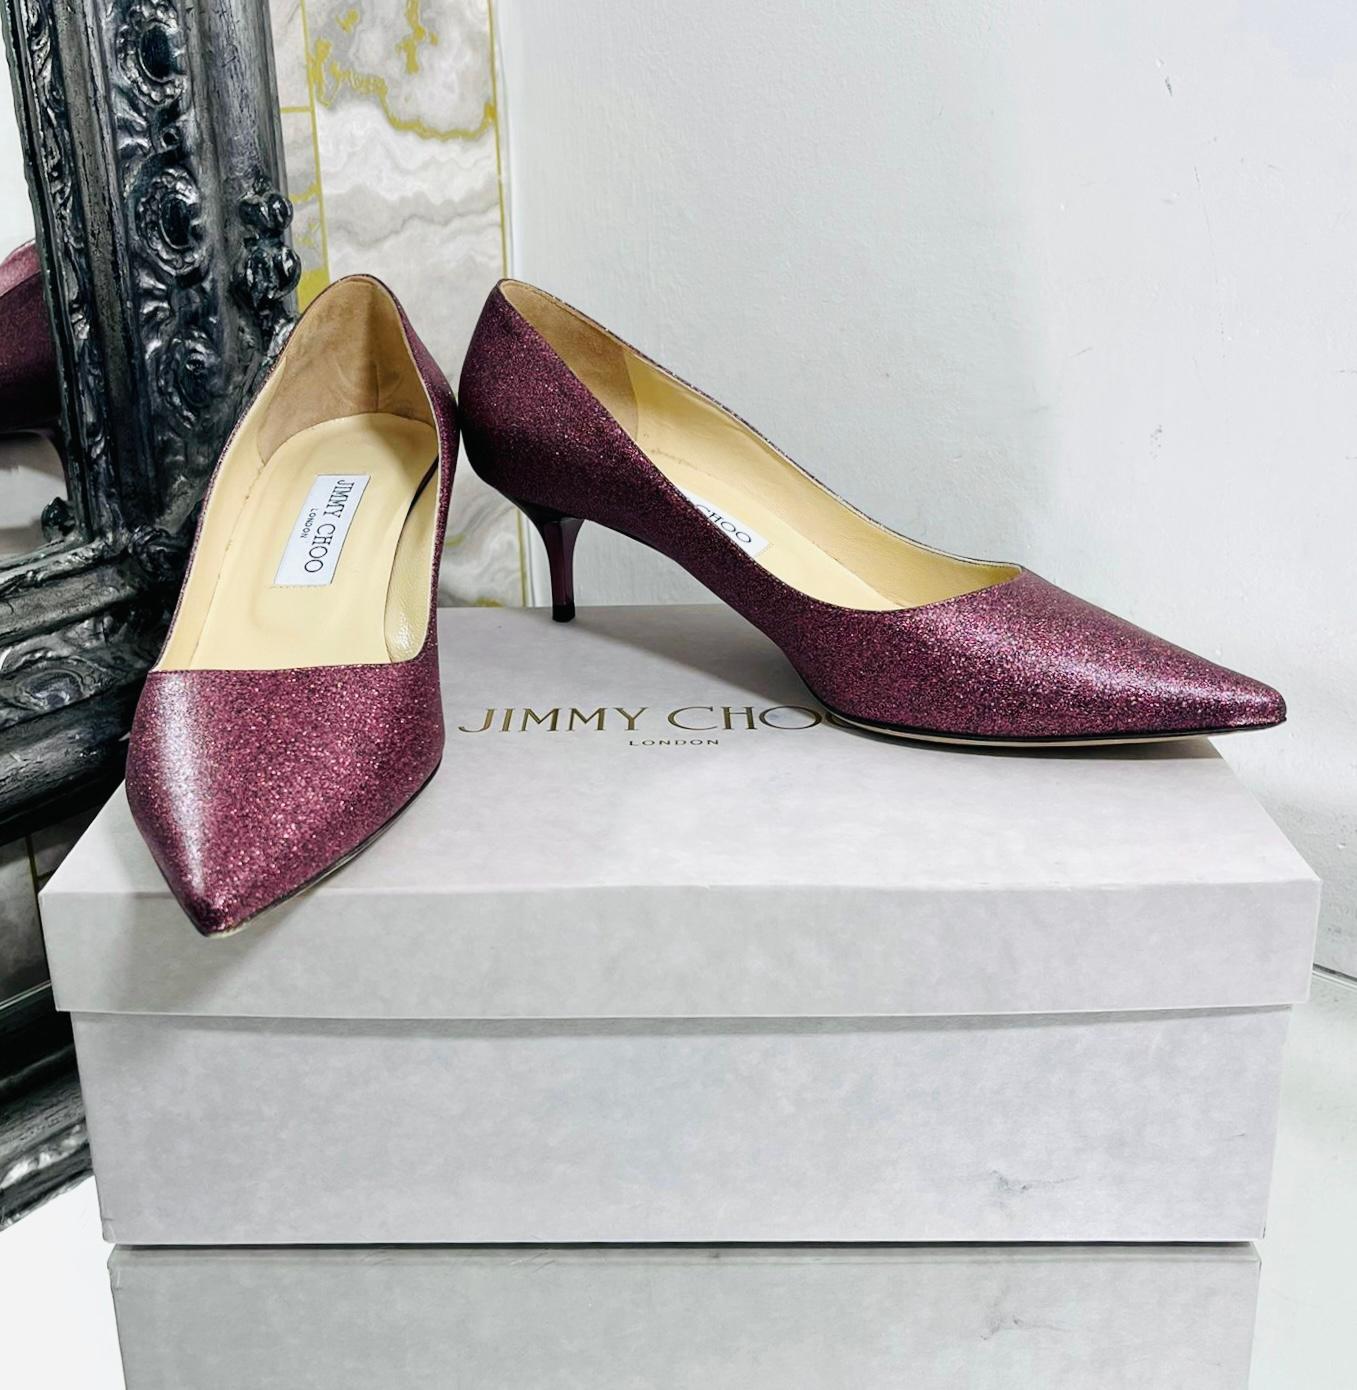 Jimmy Choo Glitter Pumps

Dark dusty fuchsia/purple glitter heels designed with tonal metallic short stiletto heel.

Featuring pointed toe, leather lining and insoles.

Size – 38.5

Condition – Very Good

Composition – Glitter, Leather

Comes with –